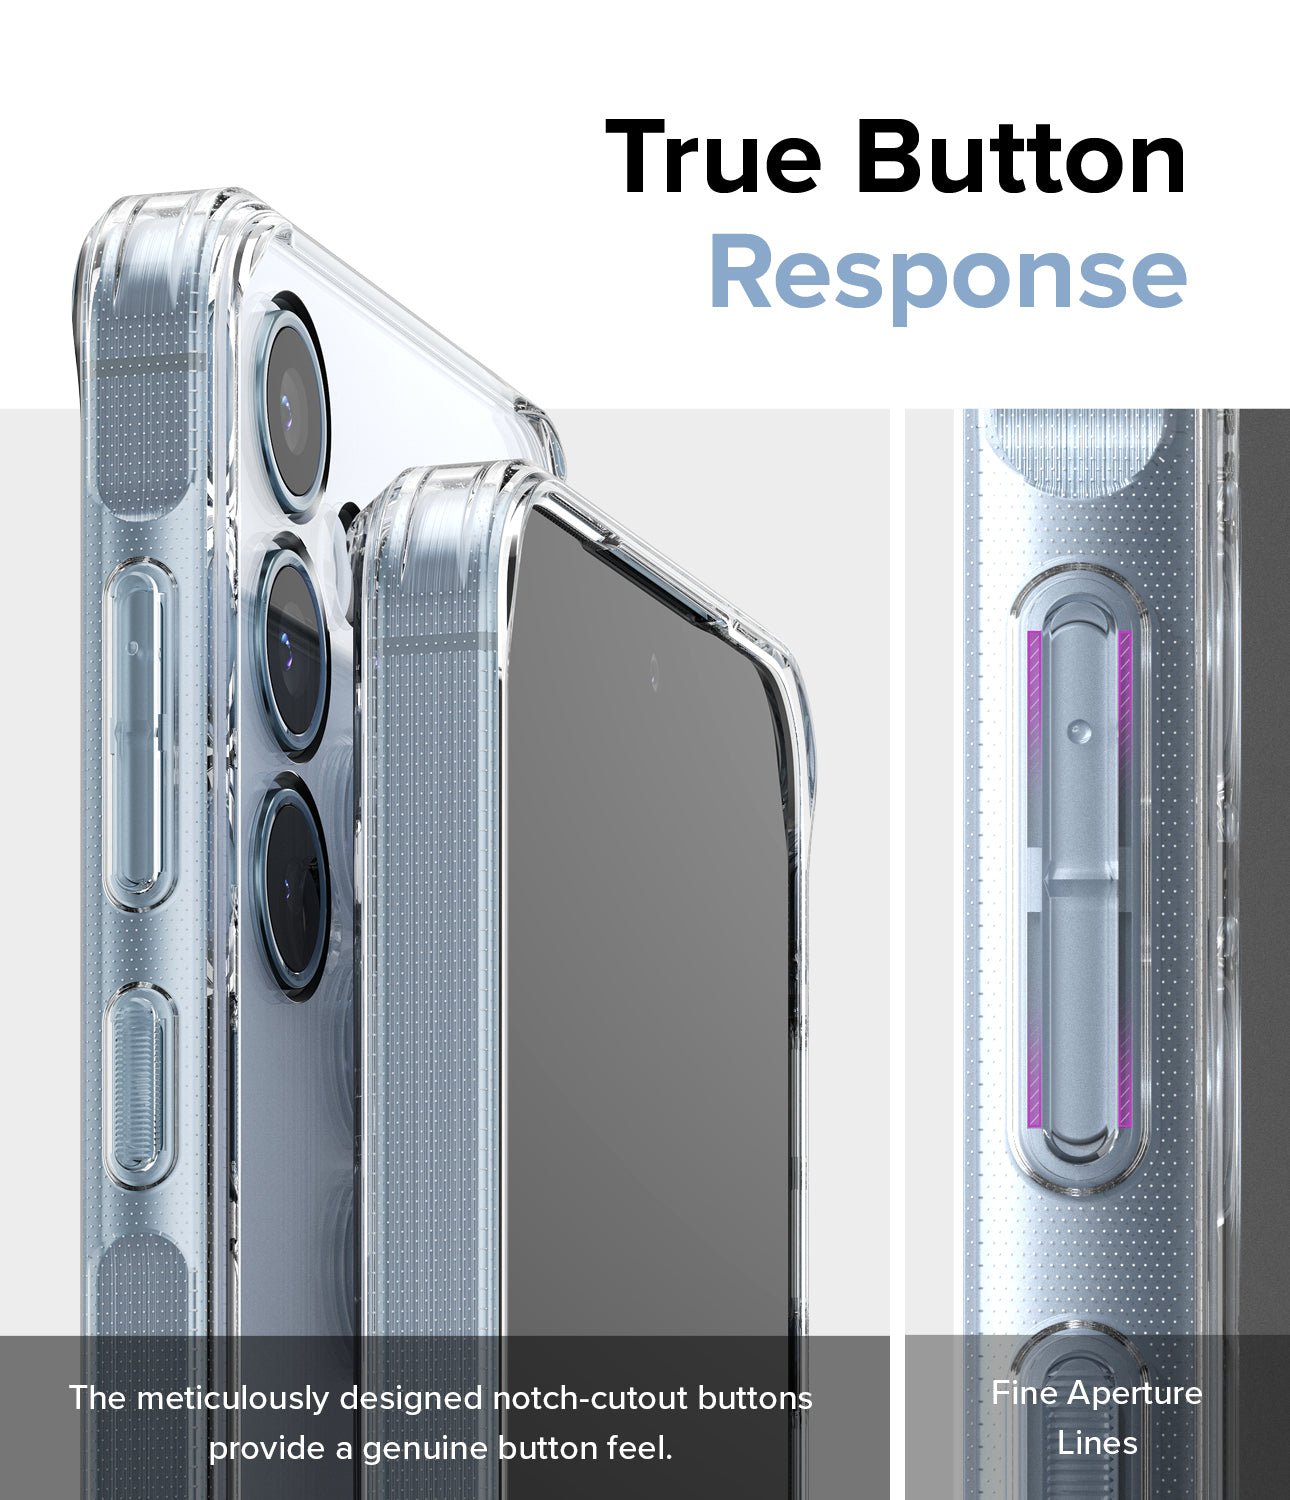 Galaxy A35 Case | Fusion - True Button Response. The meticulously designed notch-cutout buttons provide a genuine button feel. Fine Aperture lines.